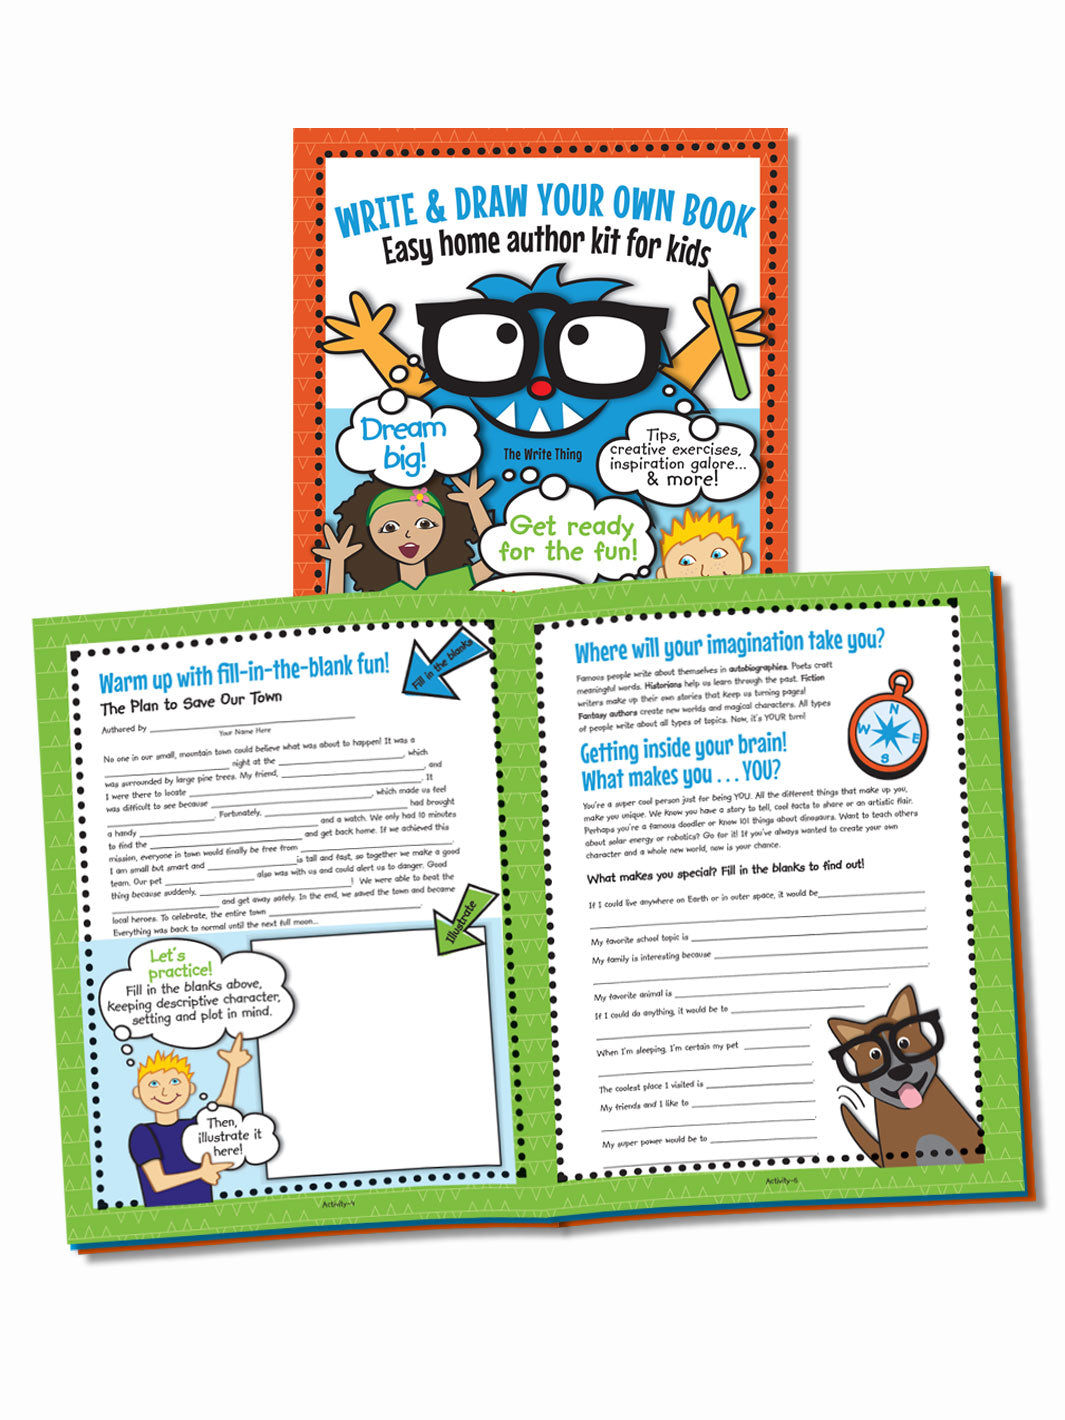 Learn how to write a children's book fast with the Kidlit Writer's Starter  Kit